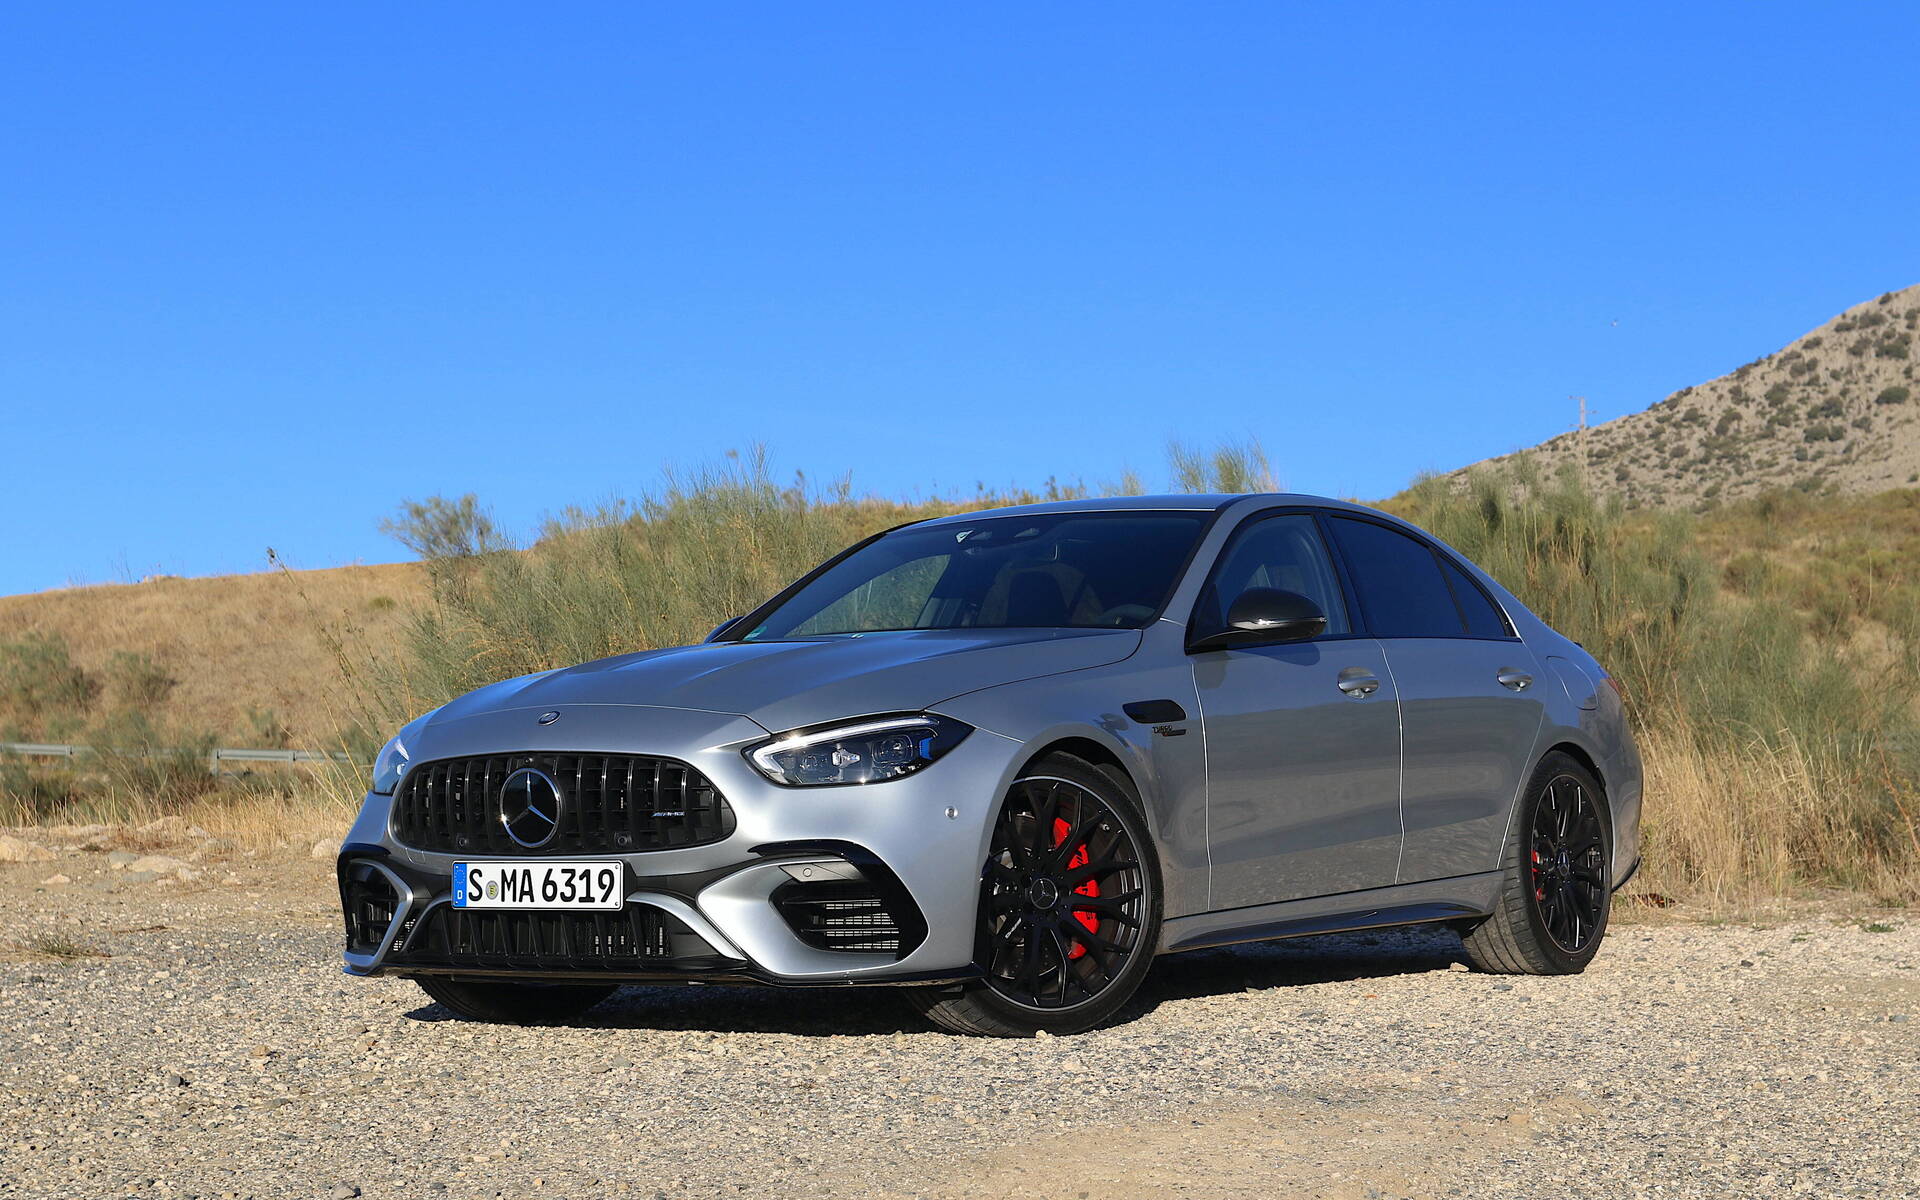 2023 Mercedes-Benz Mercedes-AMG C-Class Price, Reviews, Pictures & More